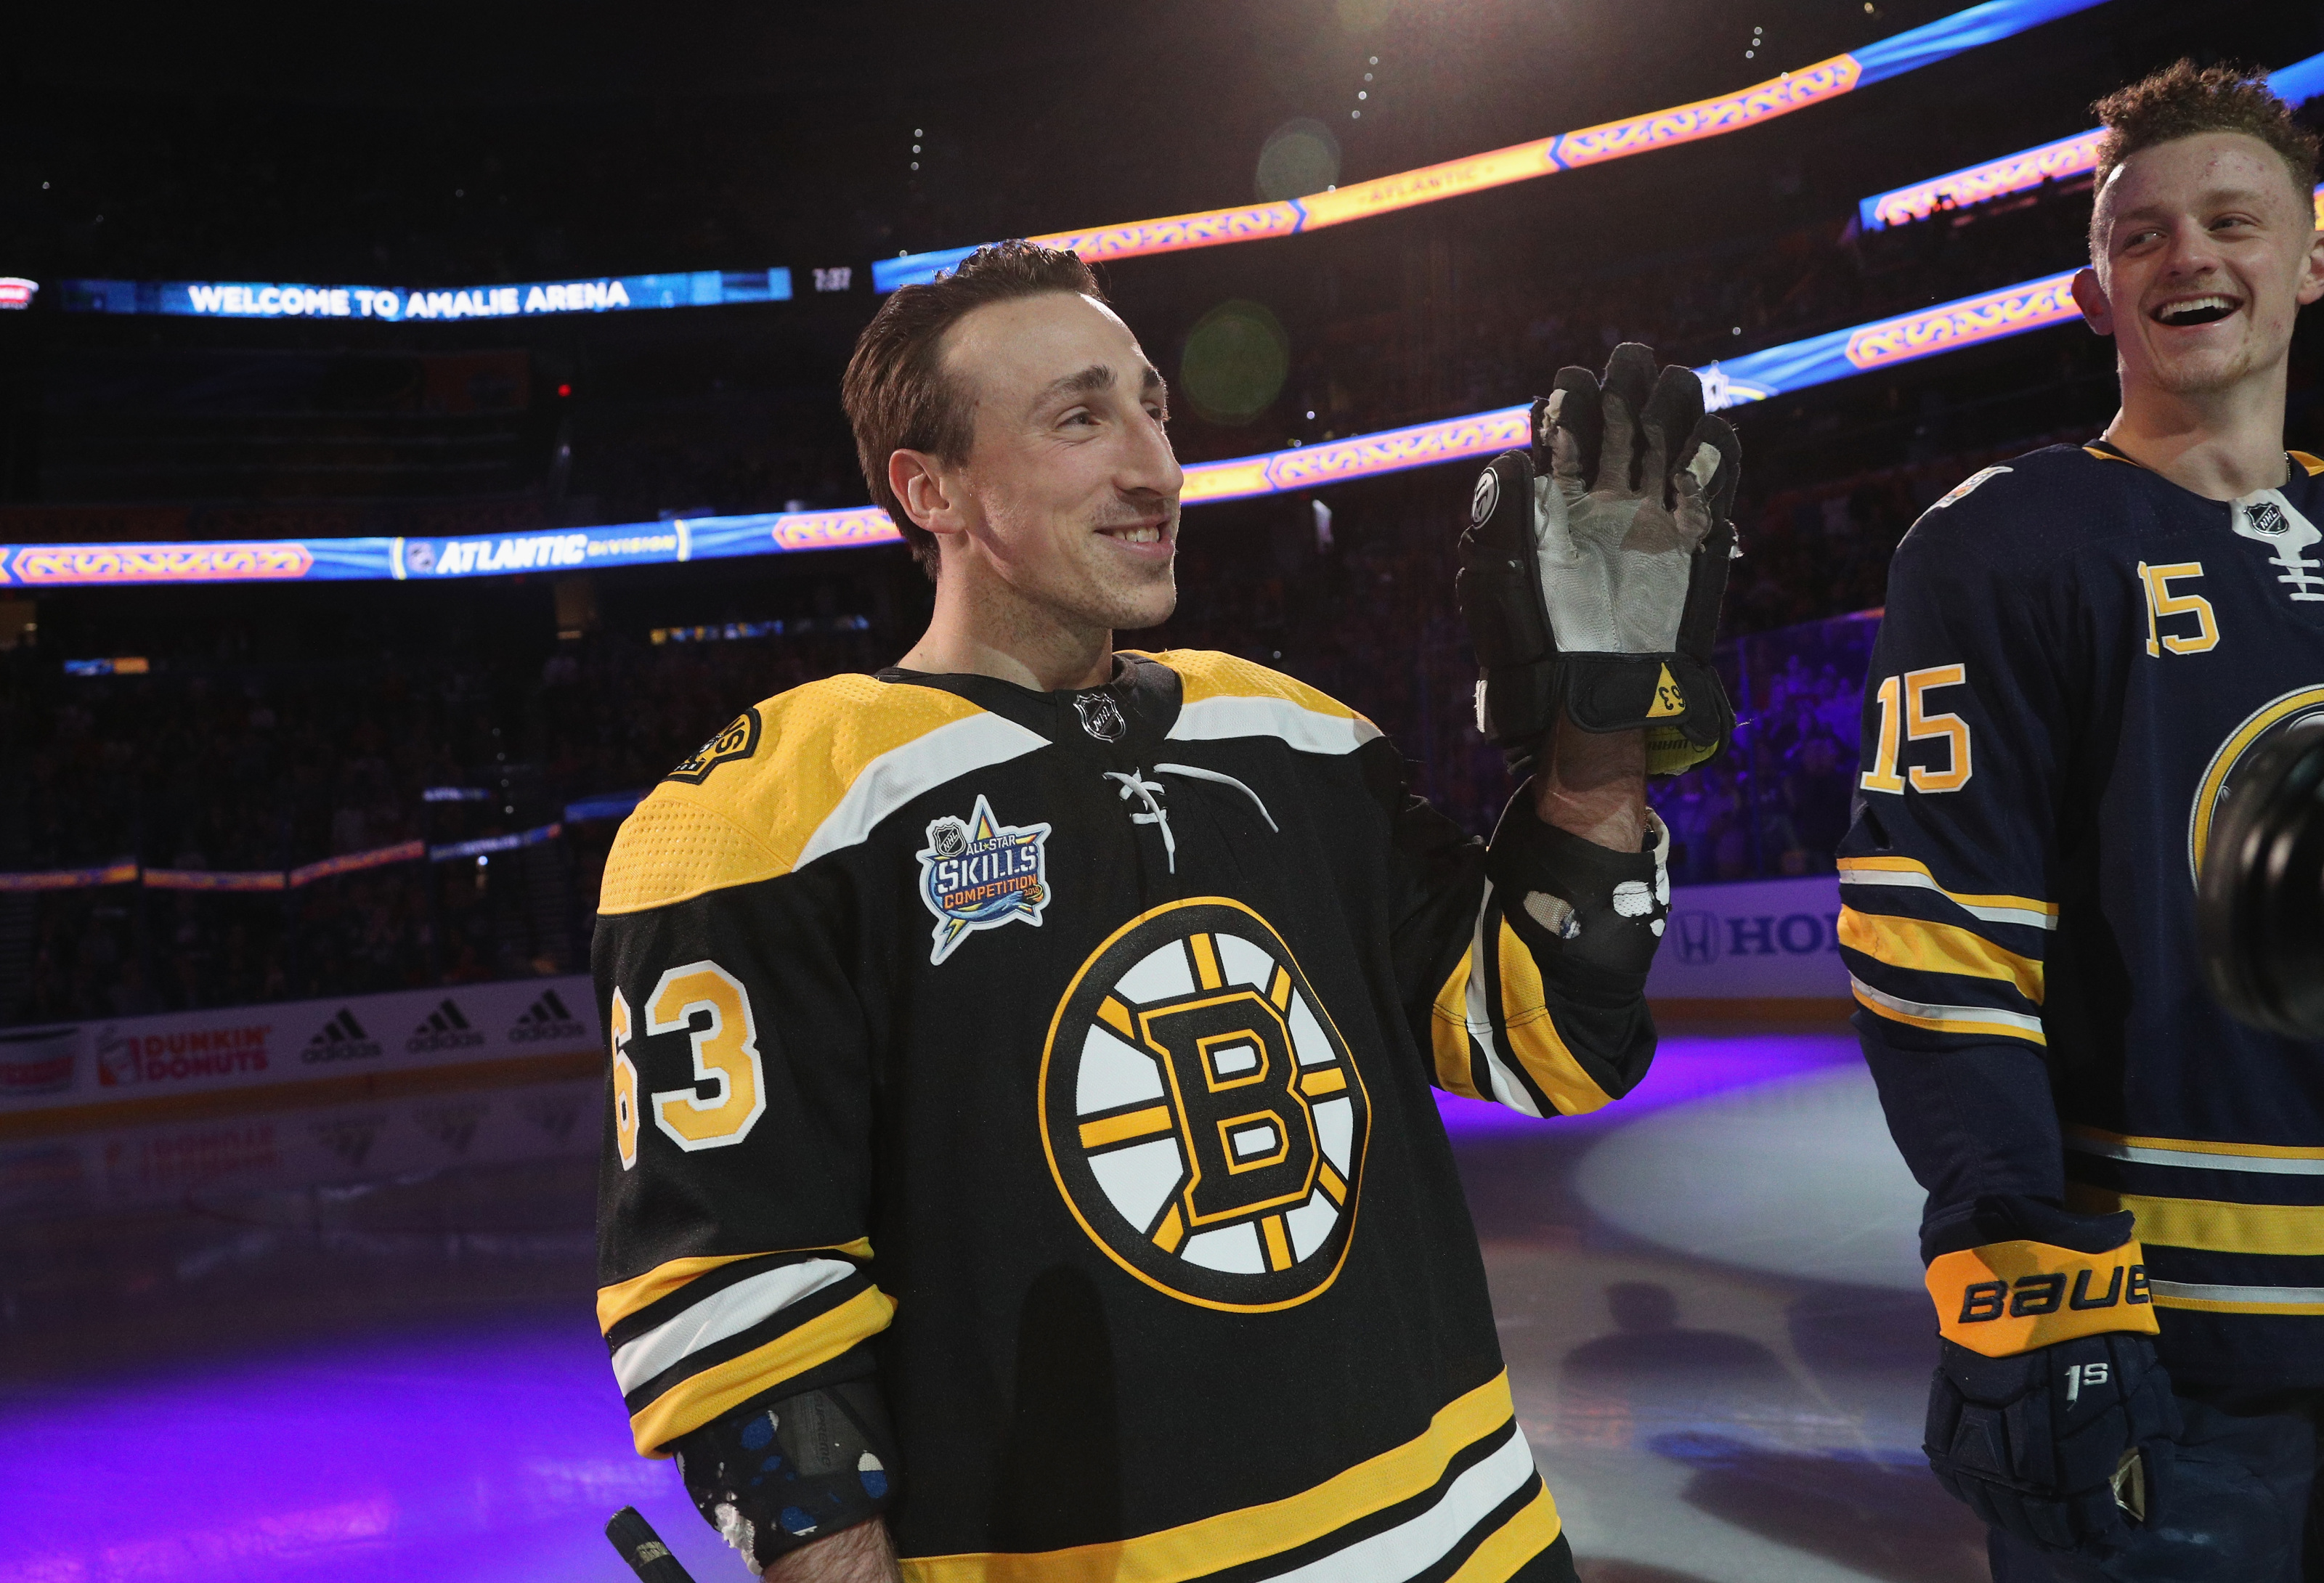 Brad Marchand, apex predator: Whether hunting game or goals, No